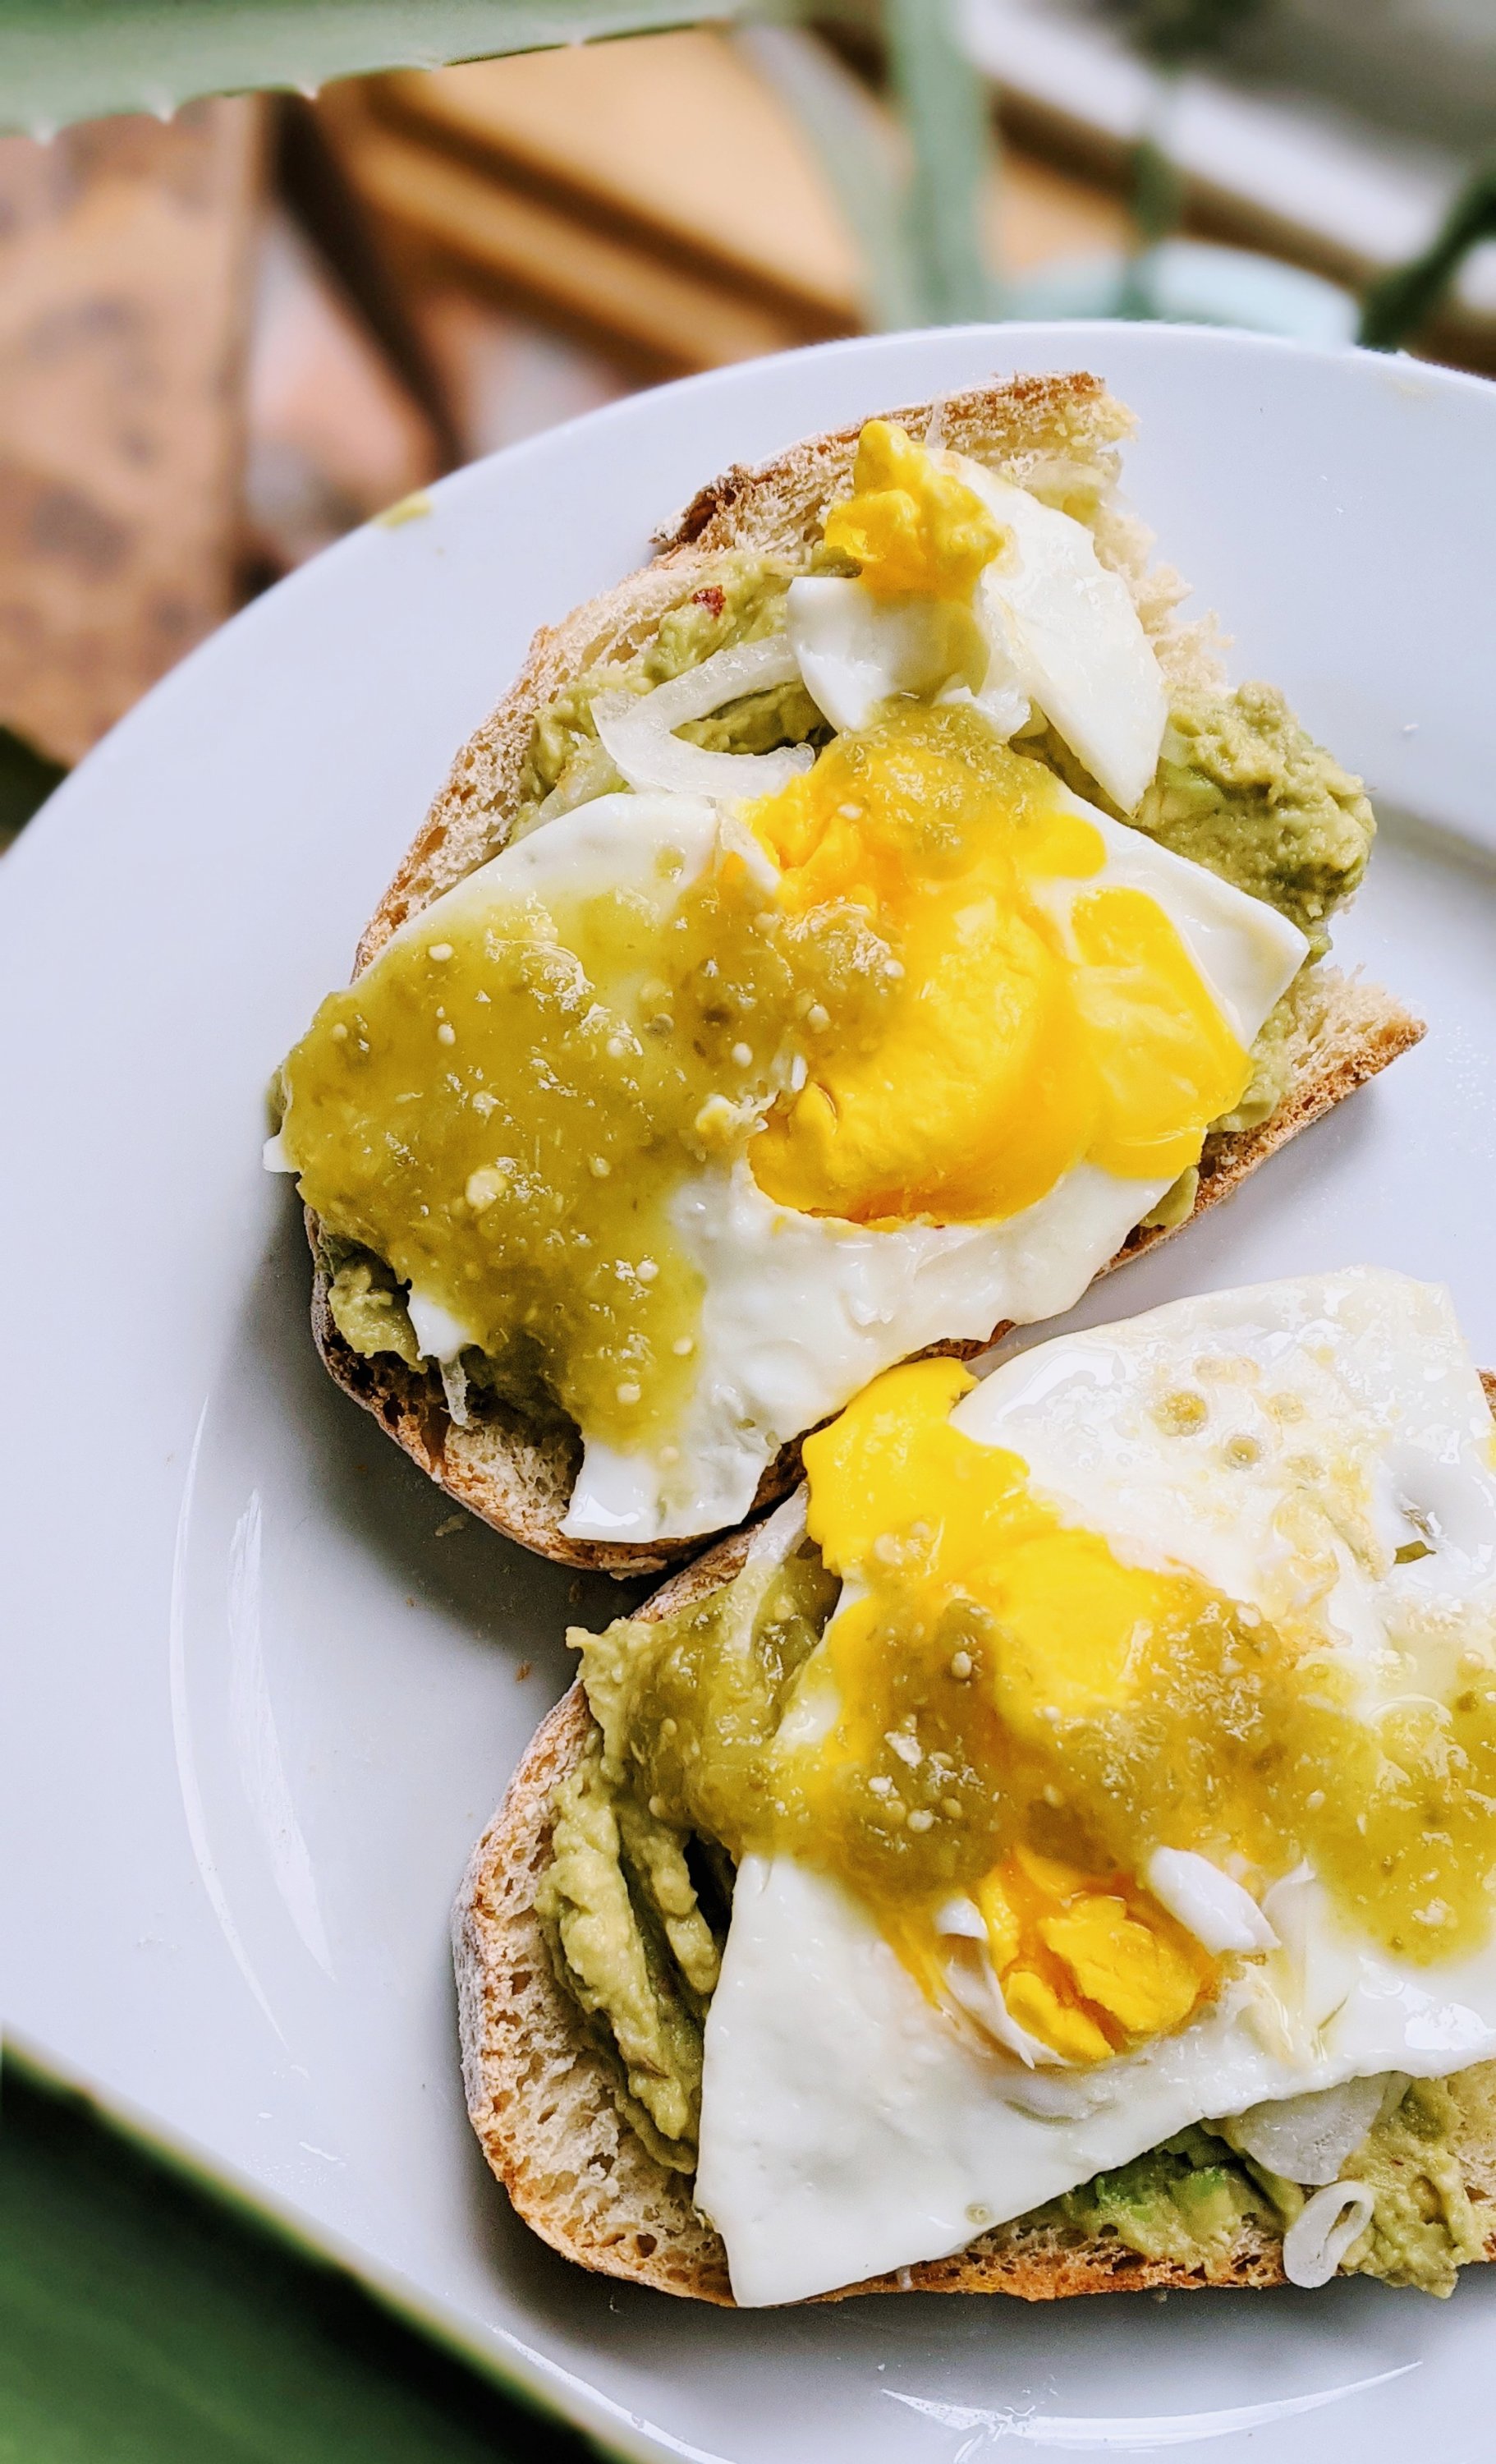 10 minute brunch sandwich recipes with tomatillo salsa verde recipes for breakfast sandwiches with raw tomatillo recipes can i eat raw tomatillos